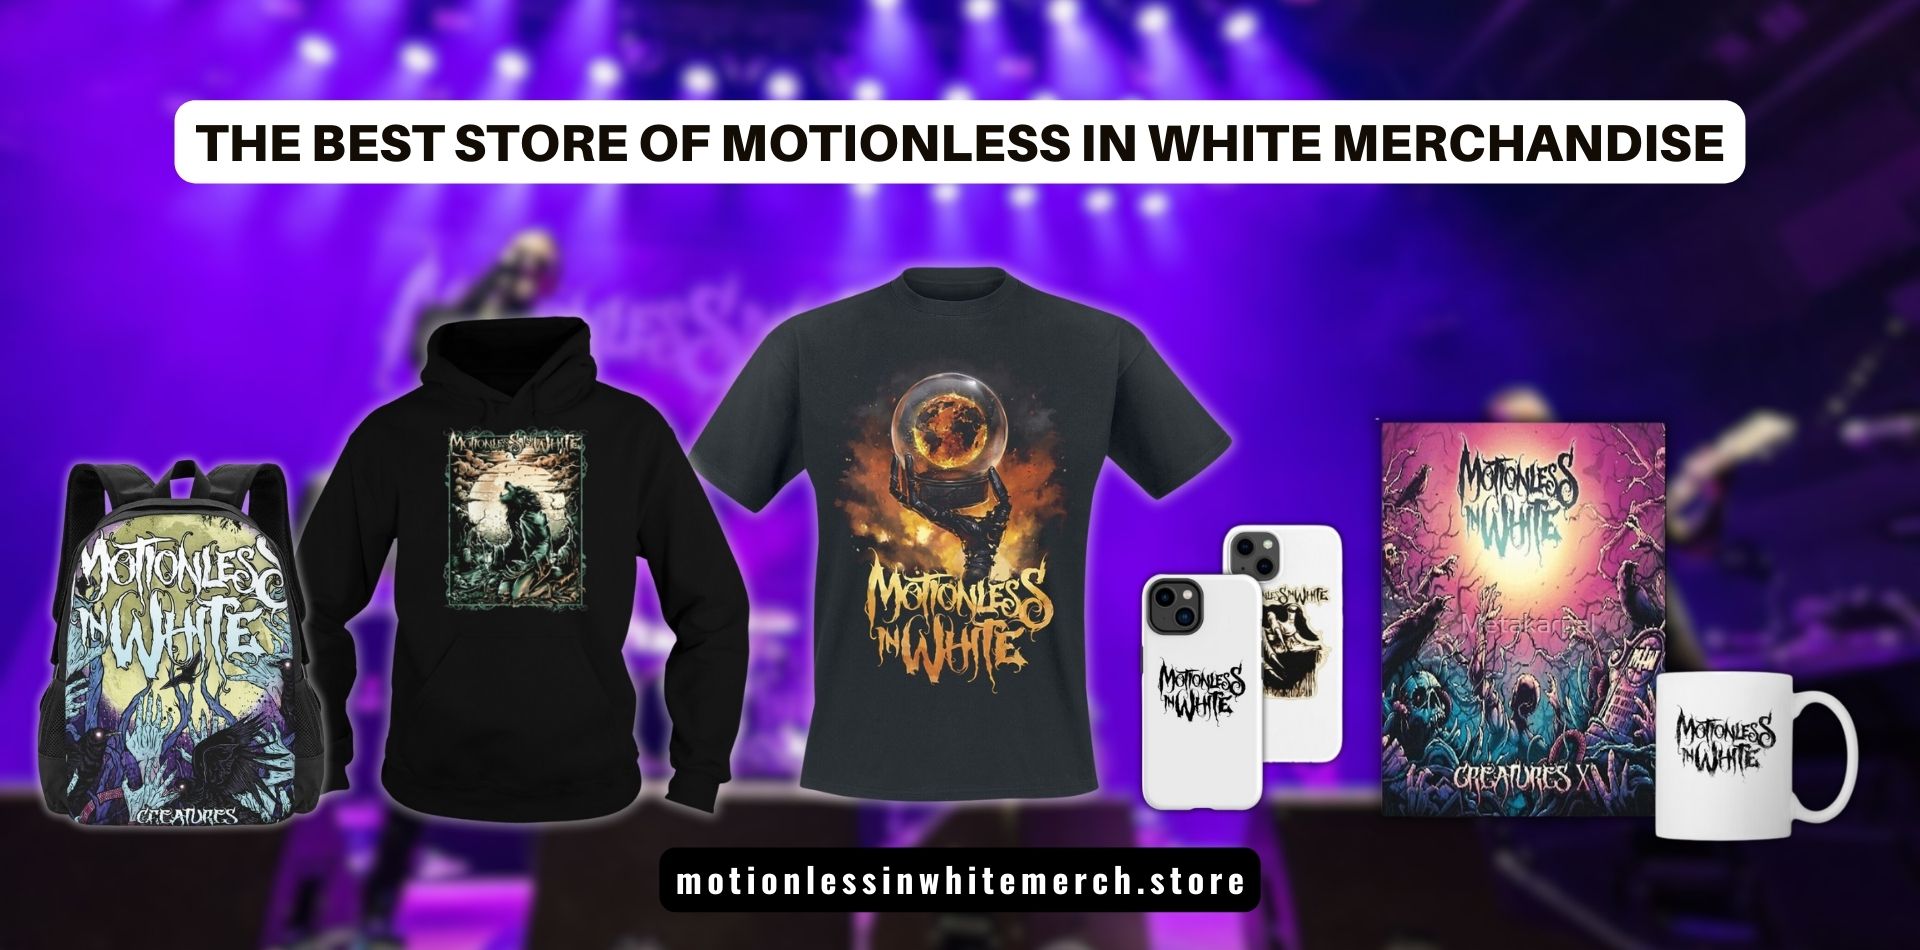 Motionless In White Shop - Official Motionless In White® Merchandise Store